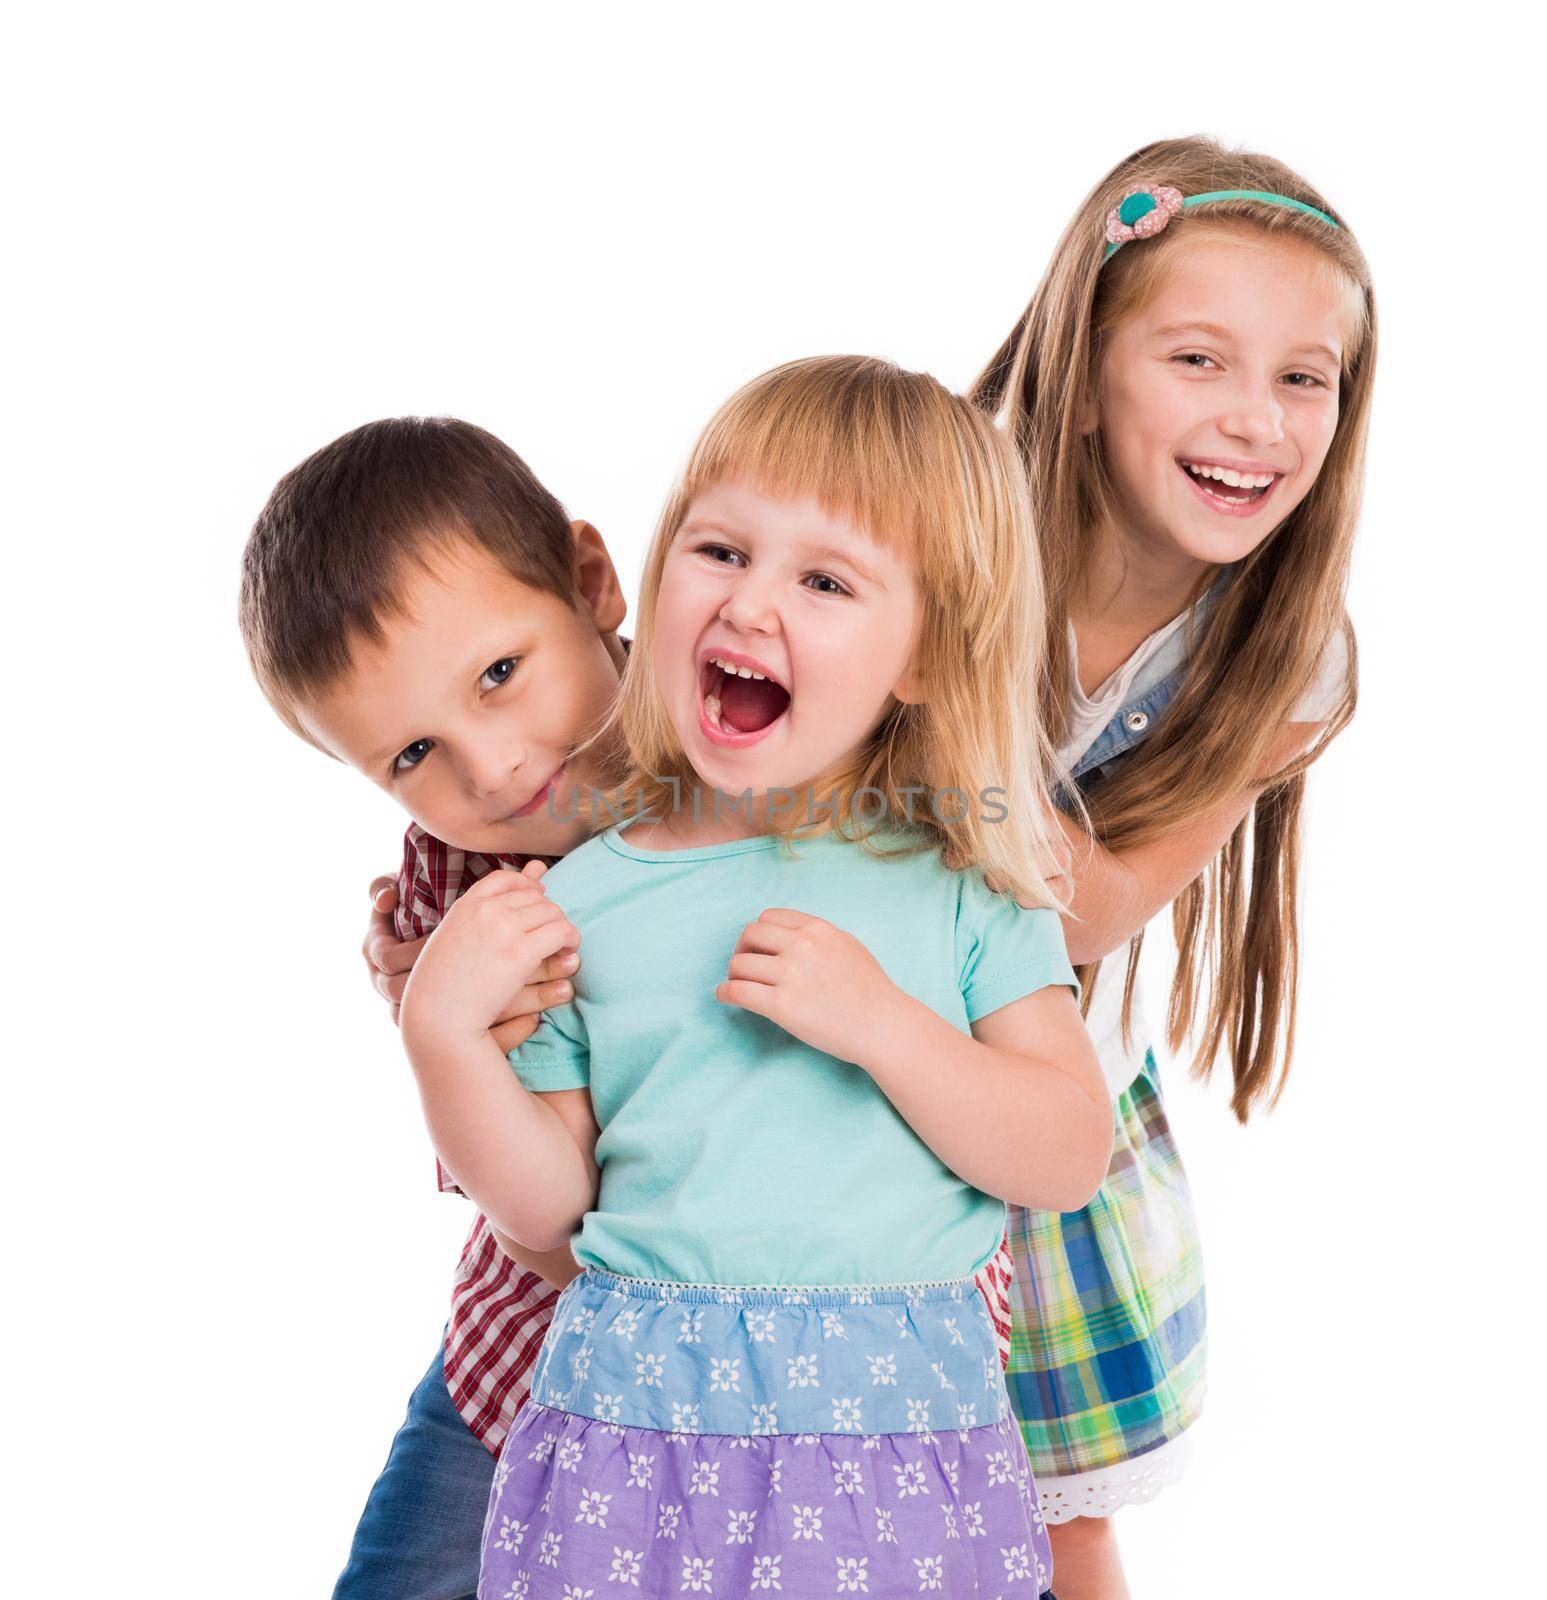 three cute children smiling isolated on white background